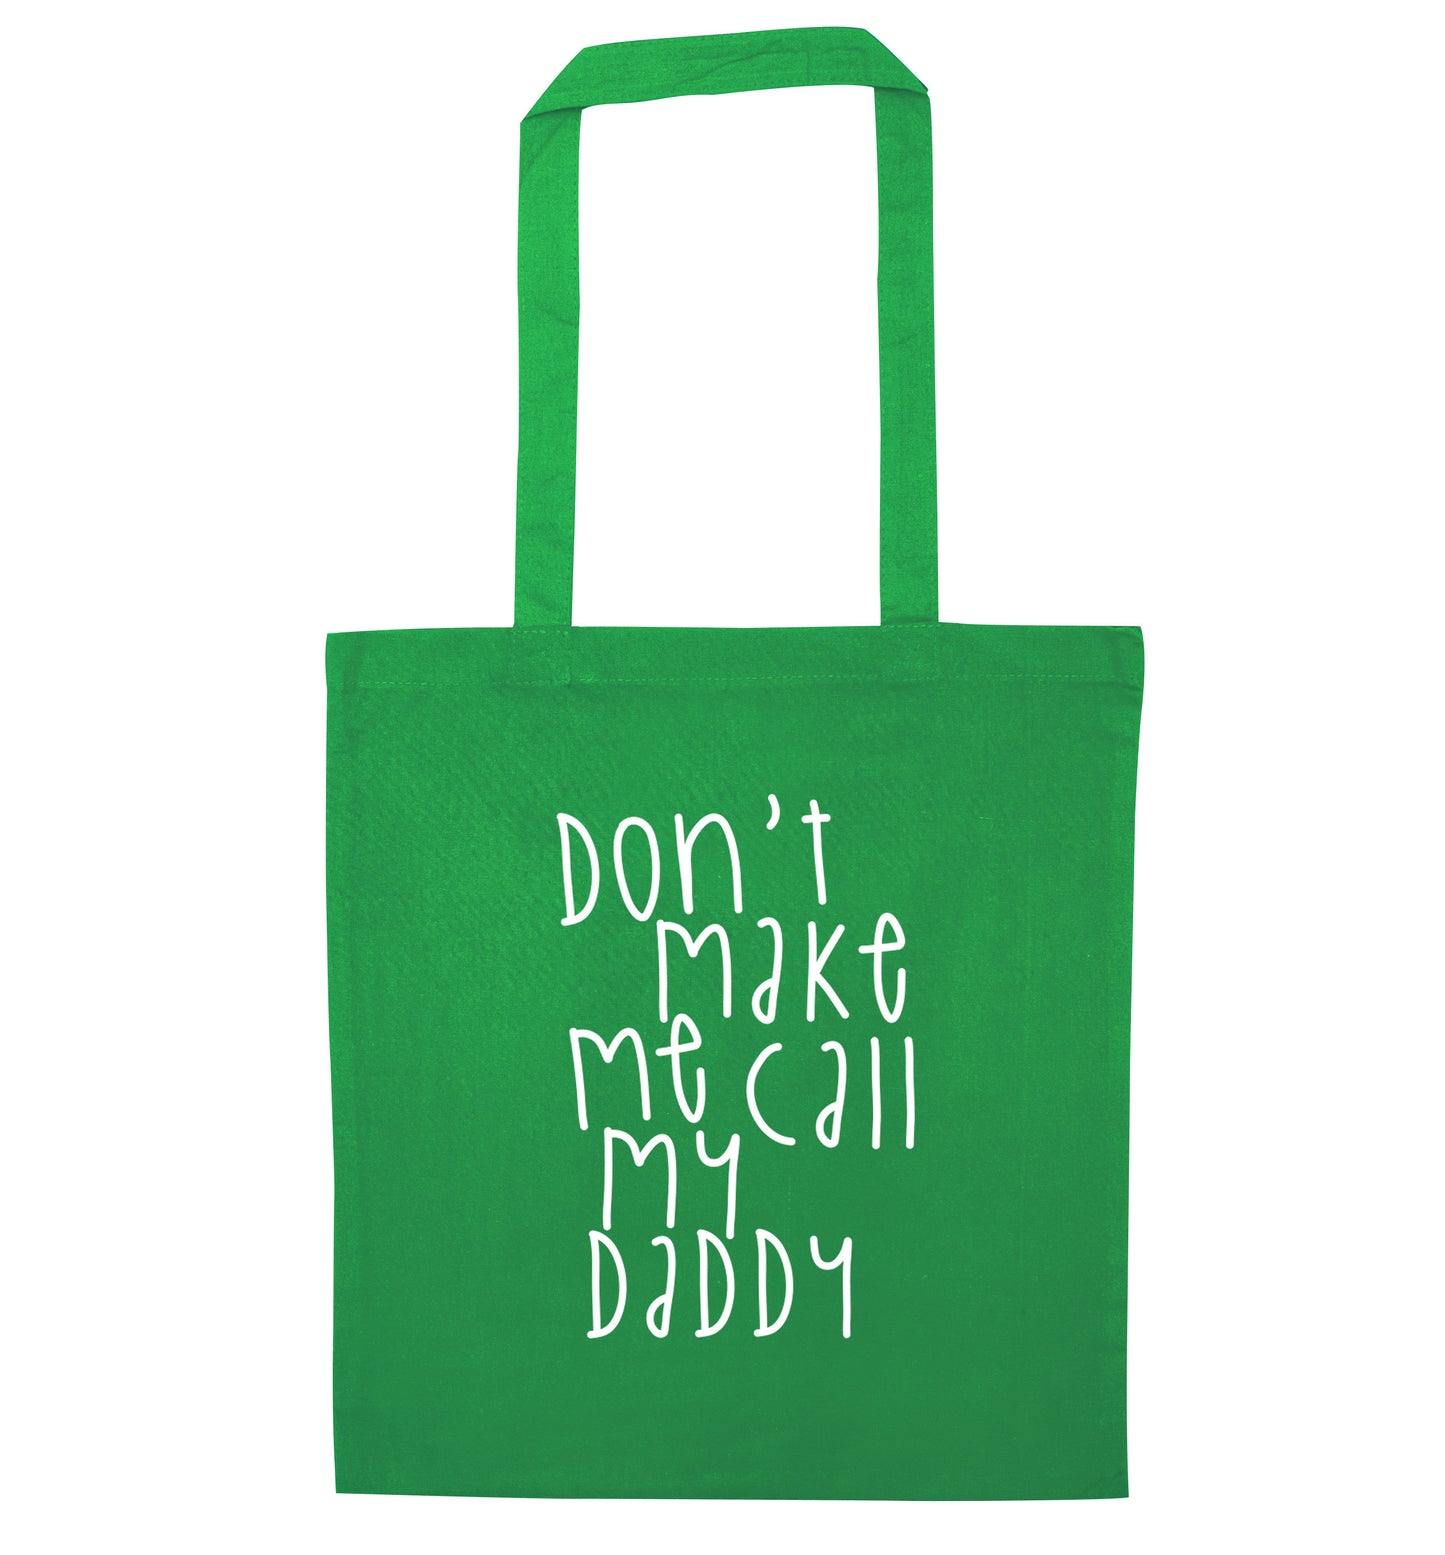 Don't make me call my daddy green tote bag